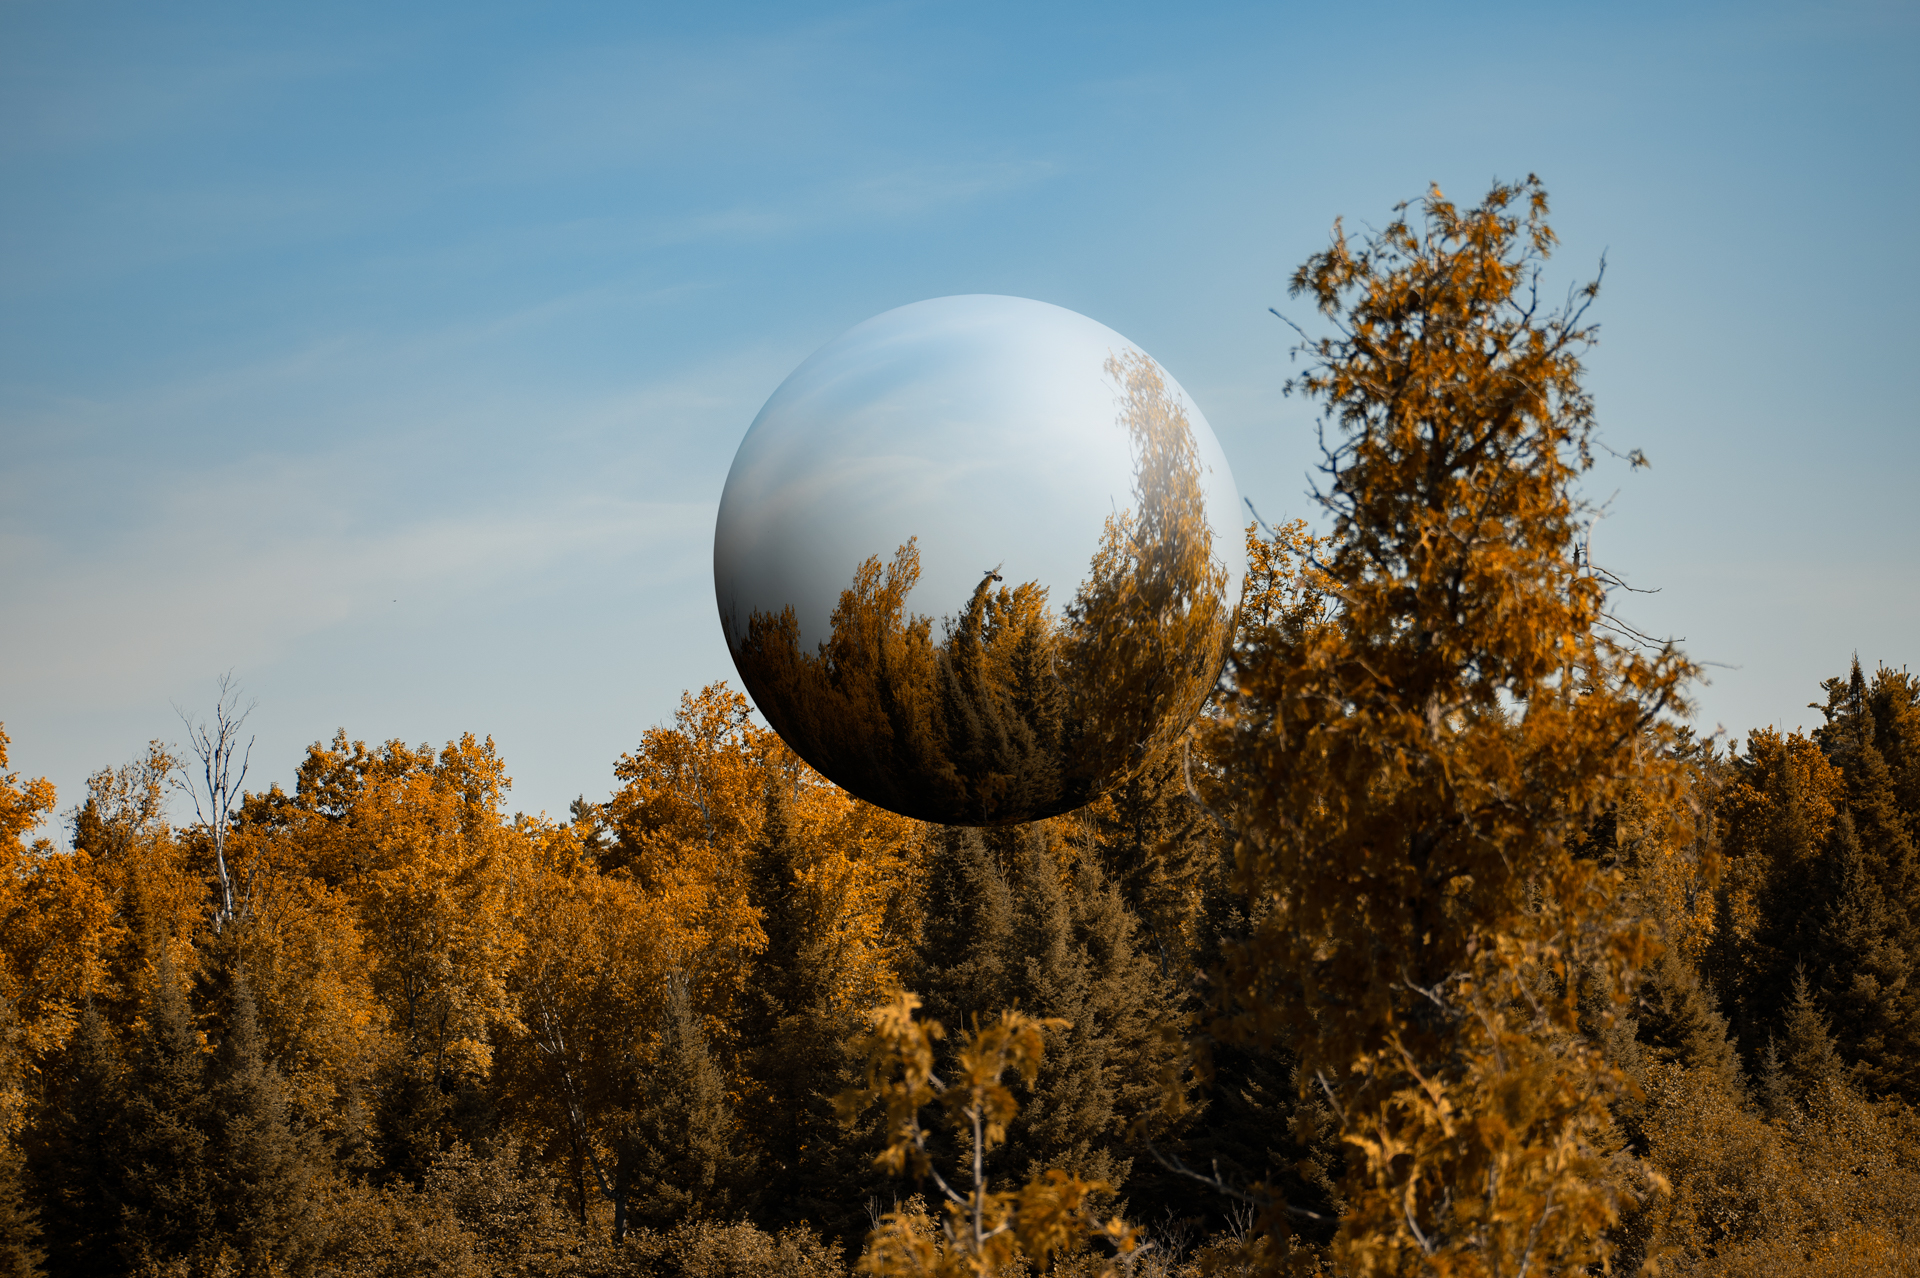 Landscape image of autumn trees and blue sky with a sphere floating in the middle.